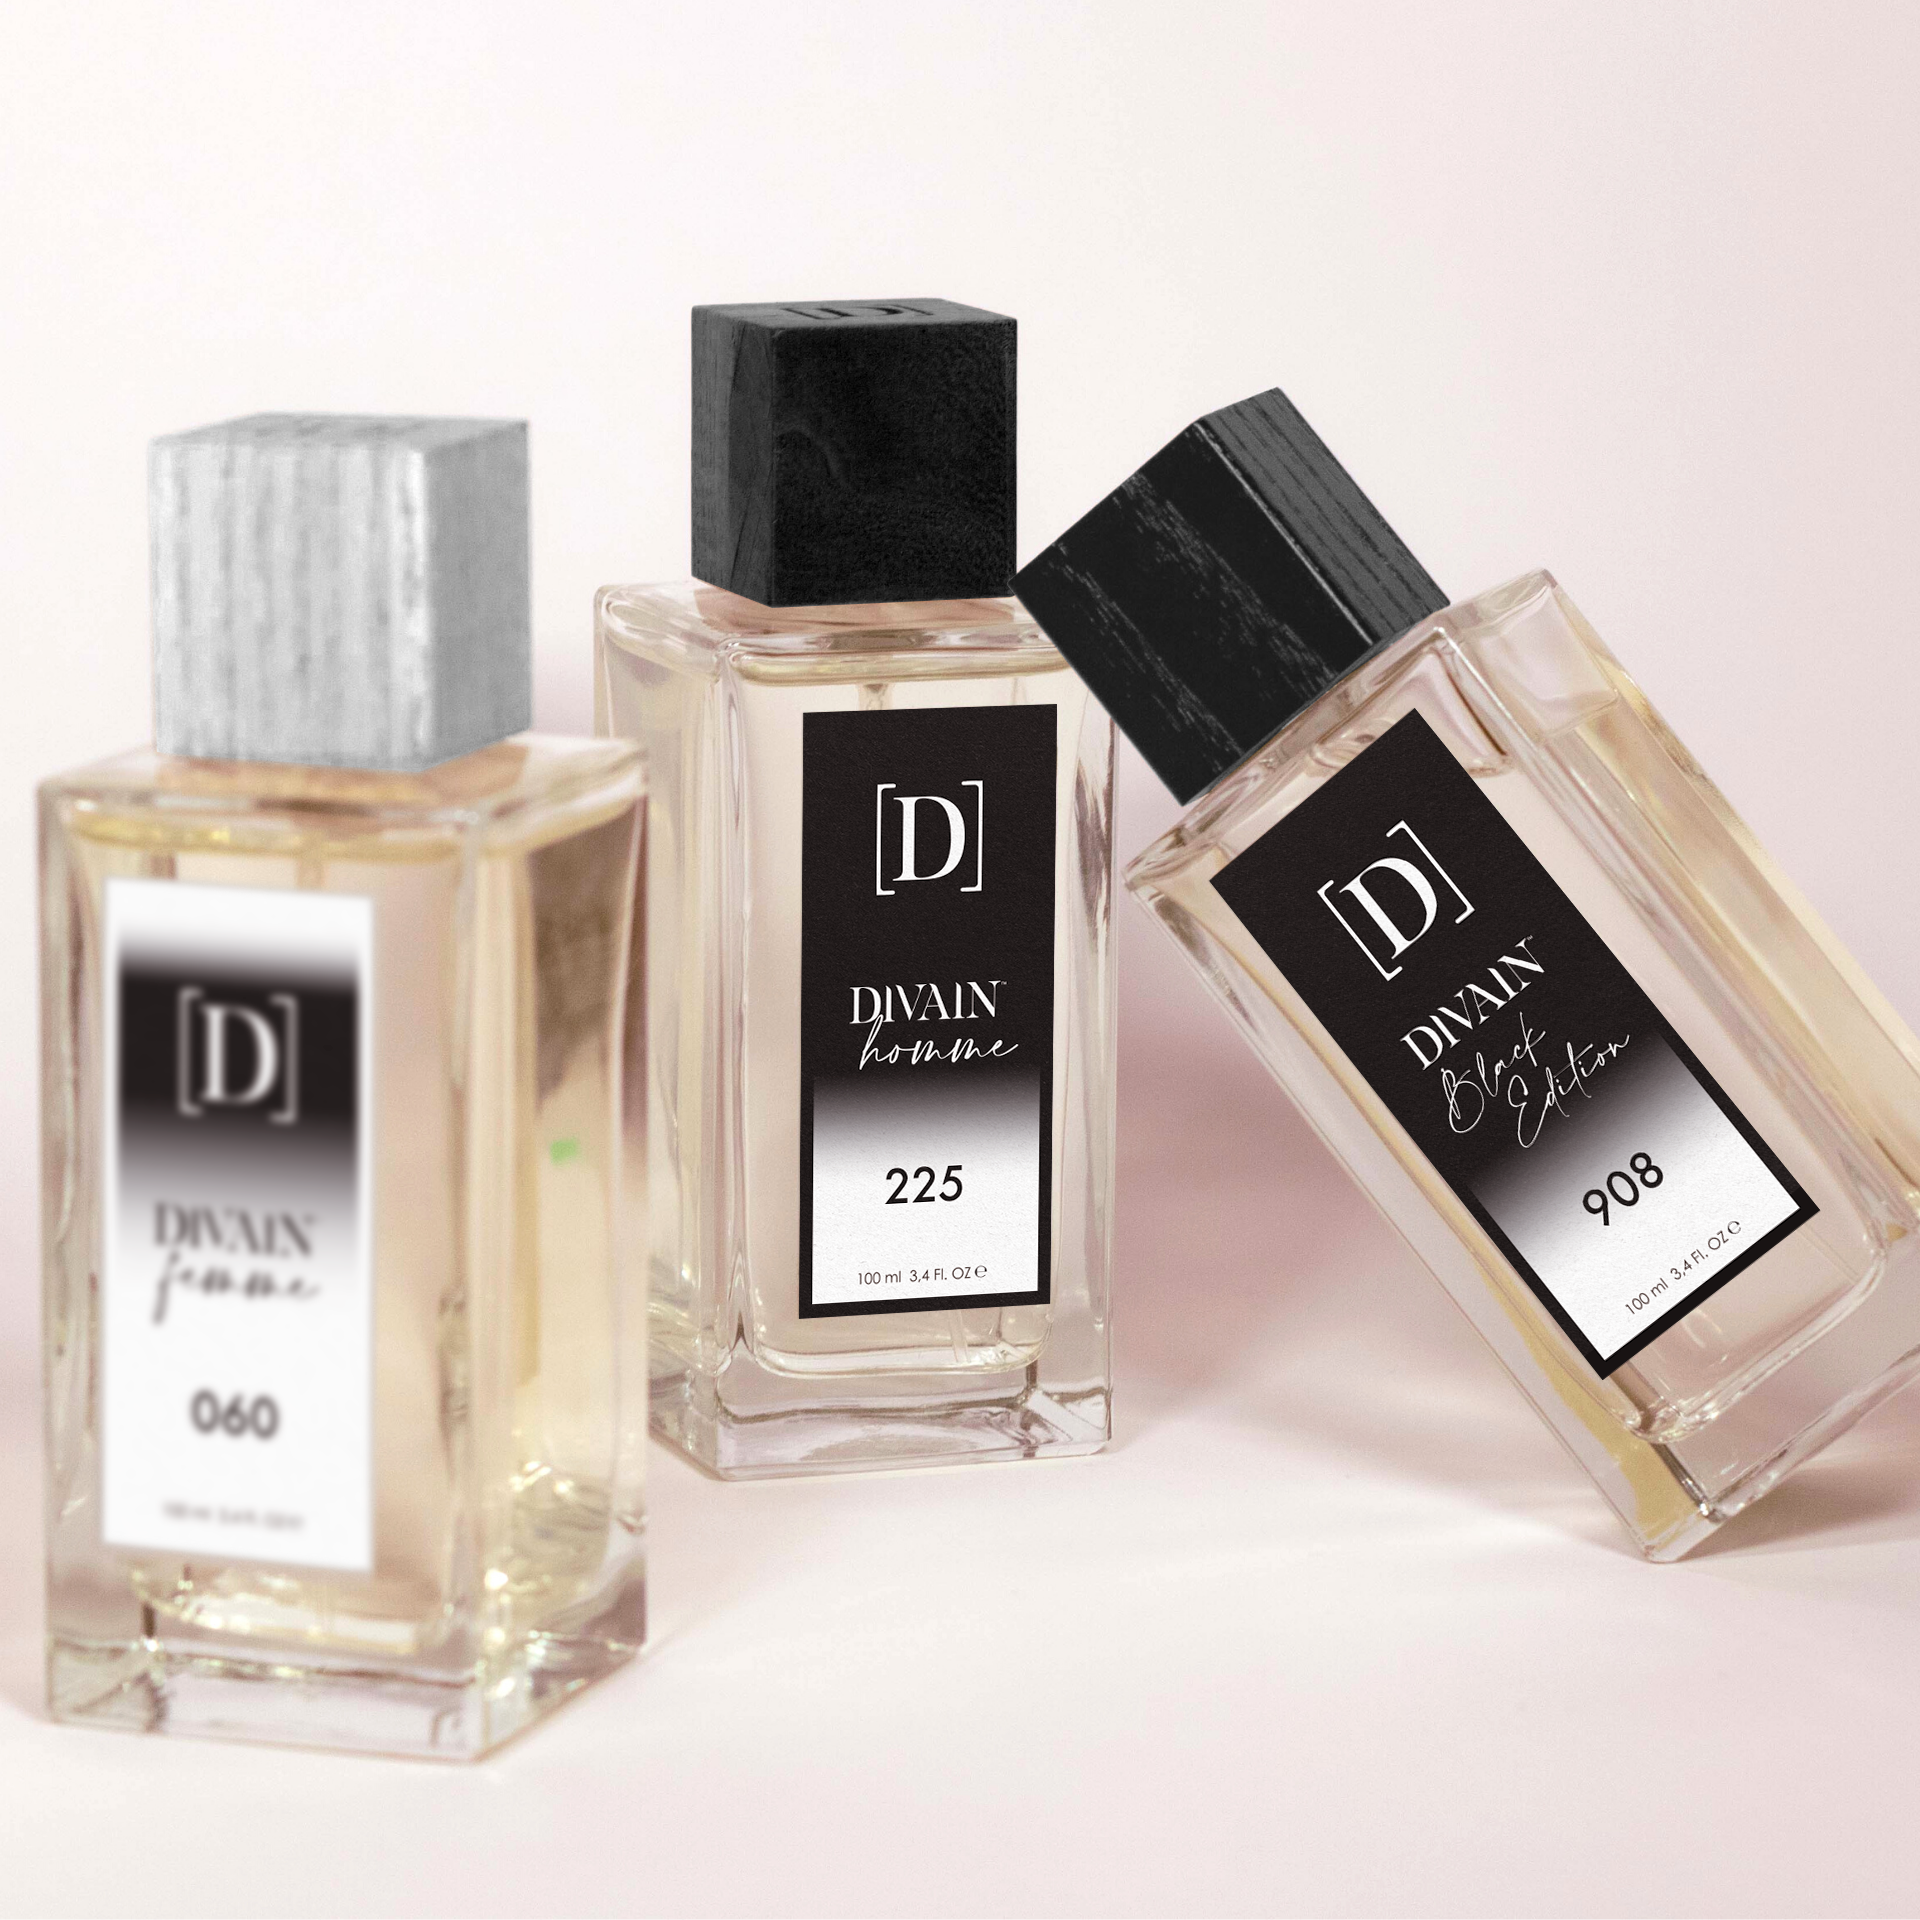 The 20 Perfume Sets That Make a Foolproof Holiday Gift